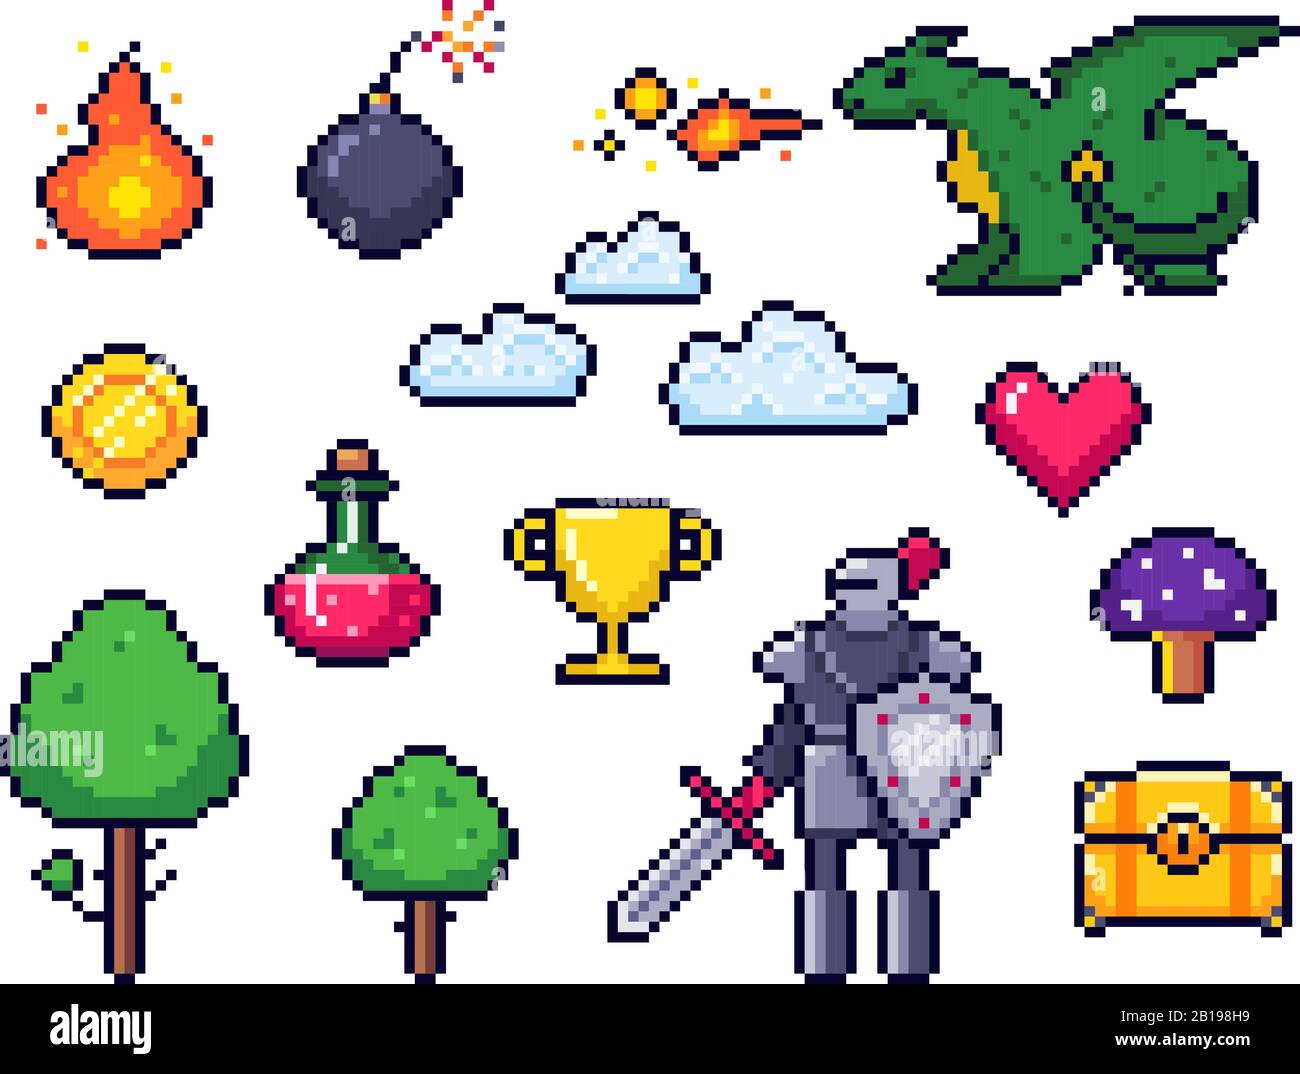 Pixel game elements. Pixelated warrior and 8 bit pixels dragon. Retro games clouds, trees and icons vector set Stock Vector